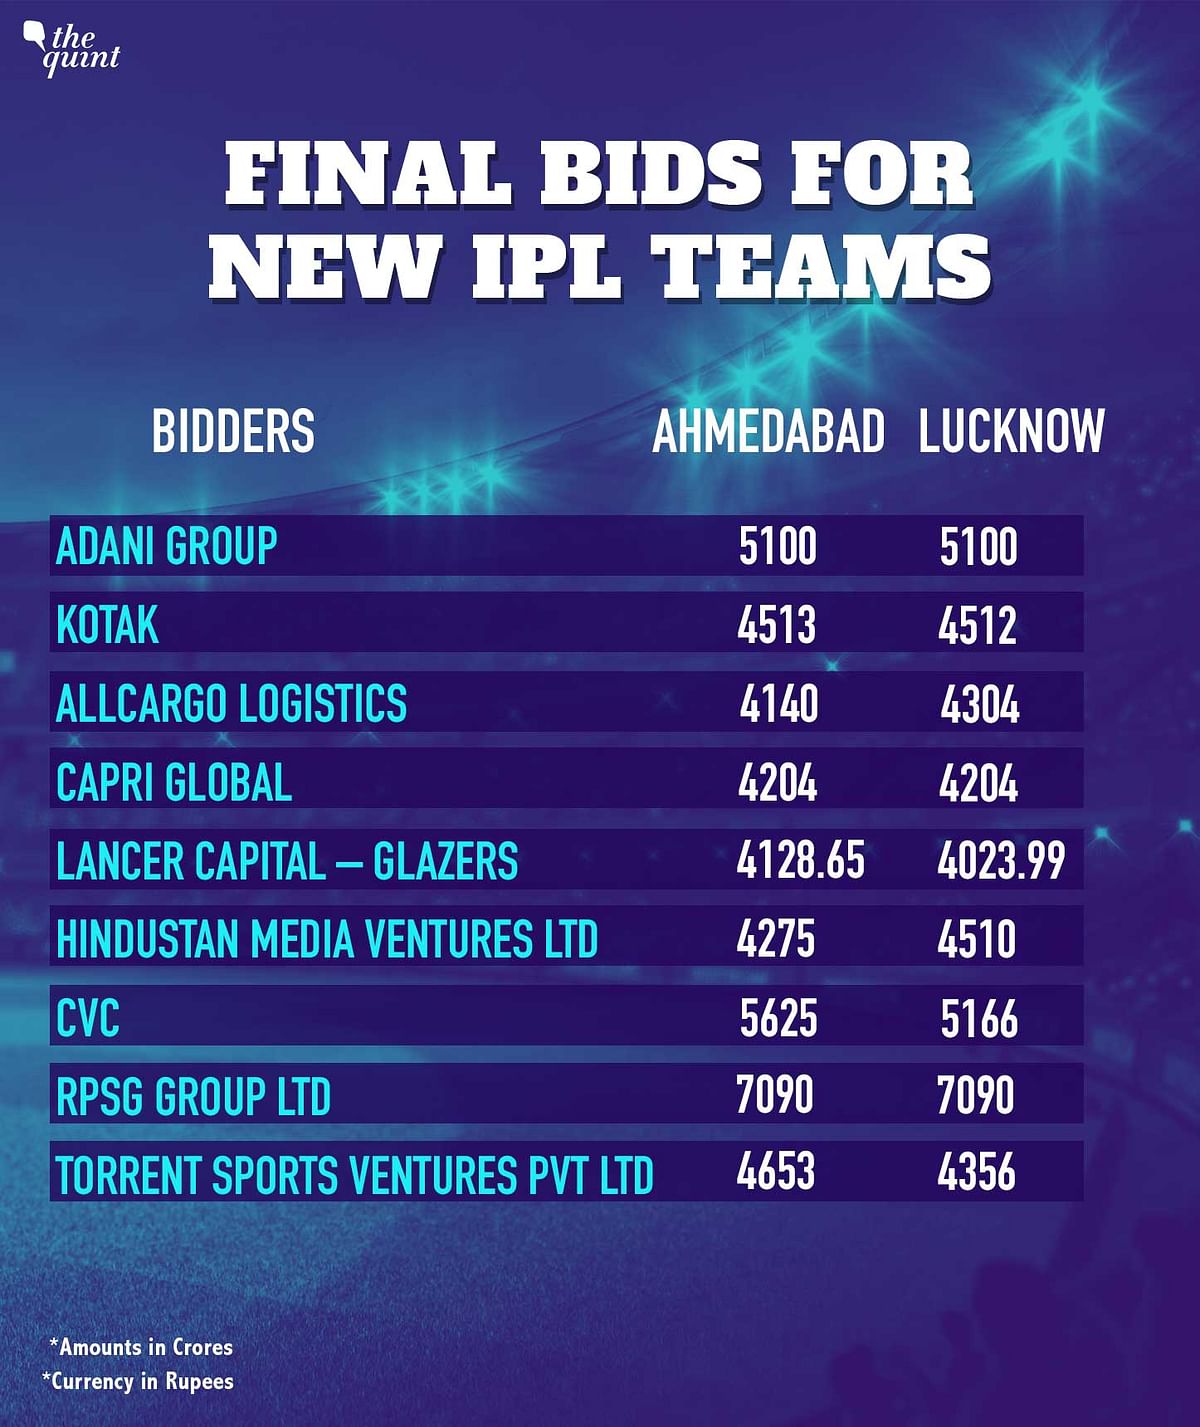 On Monday, the BCCI announced the addition of two new teams from IPL 2022.